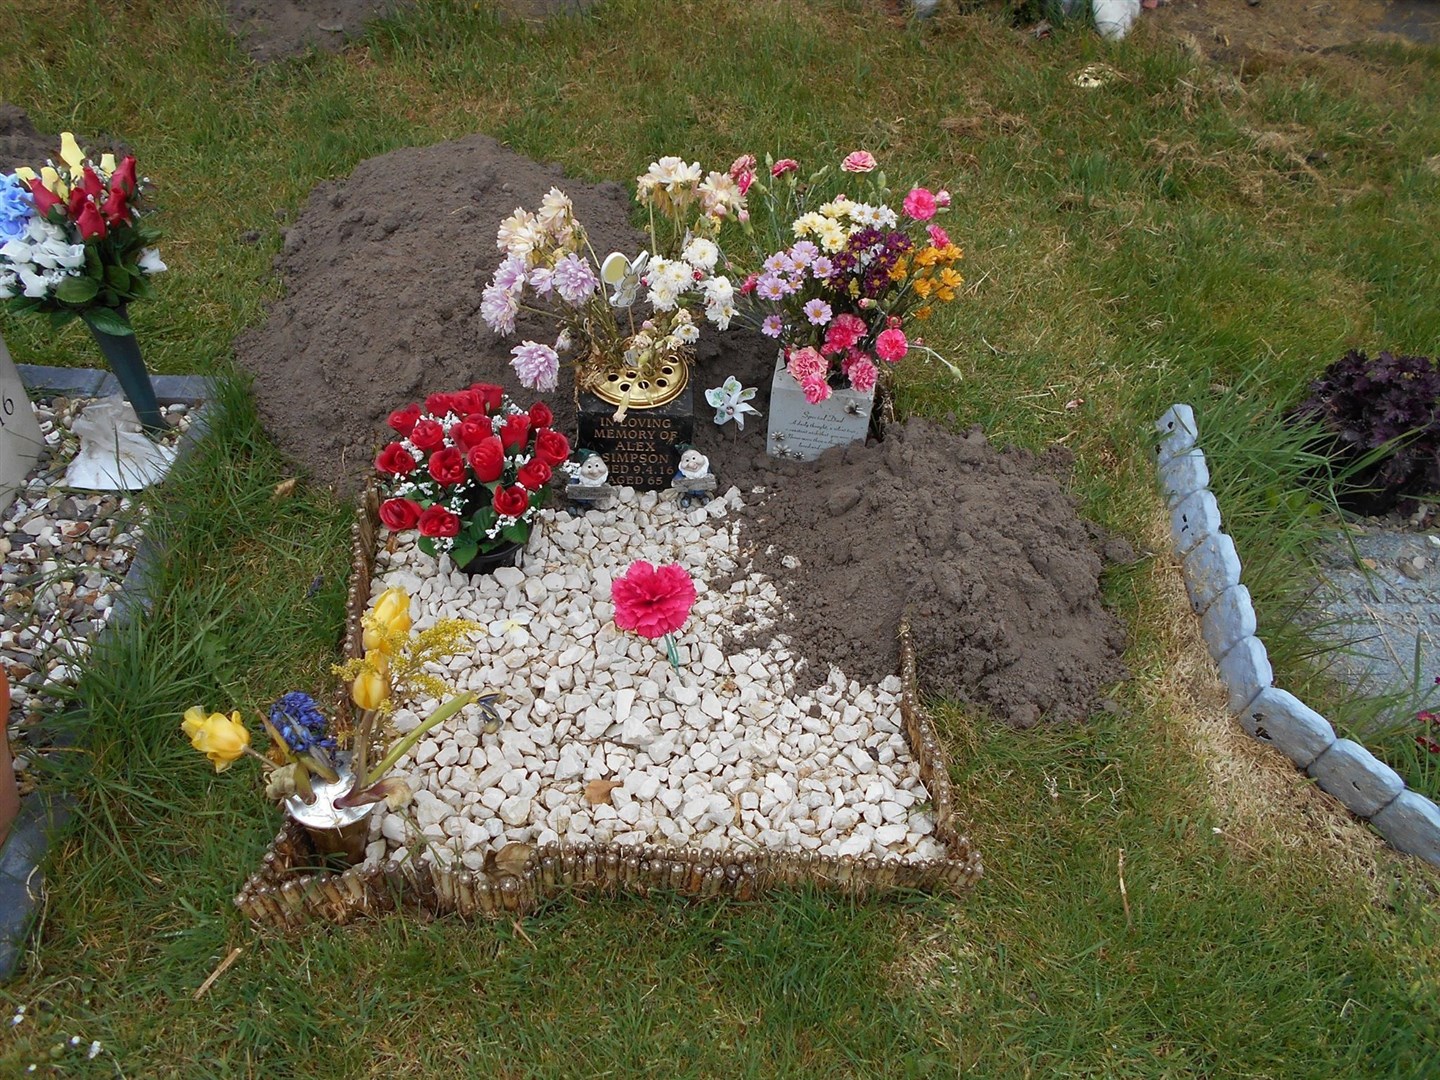 Julie's dad's grave has been attacked by moles.